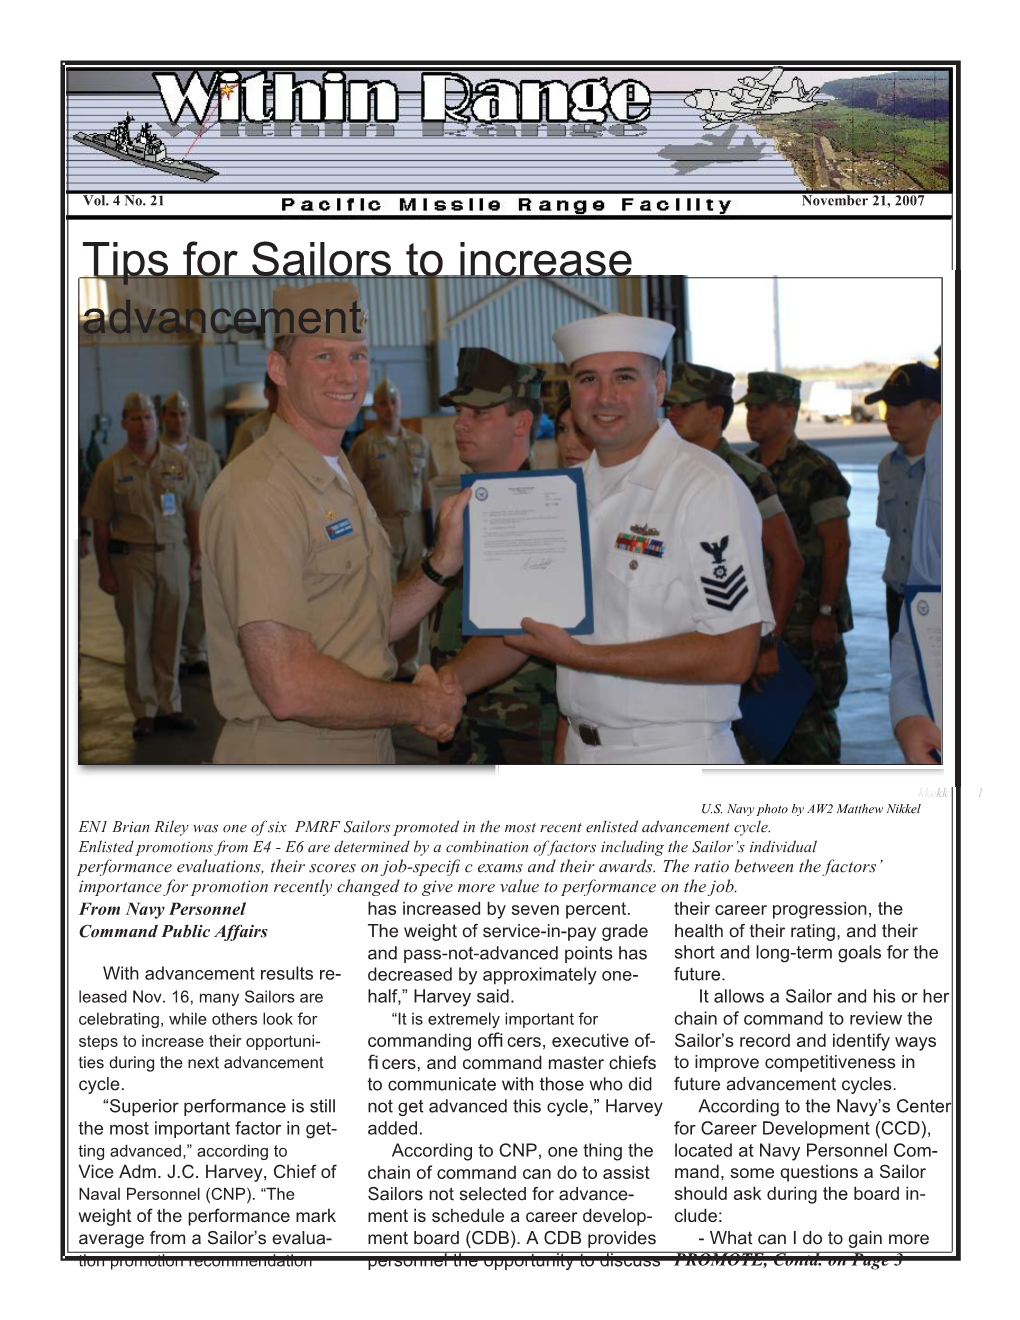 Tips for Sailors to Increase Advancement